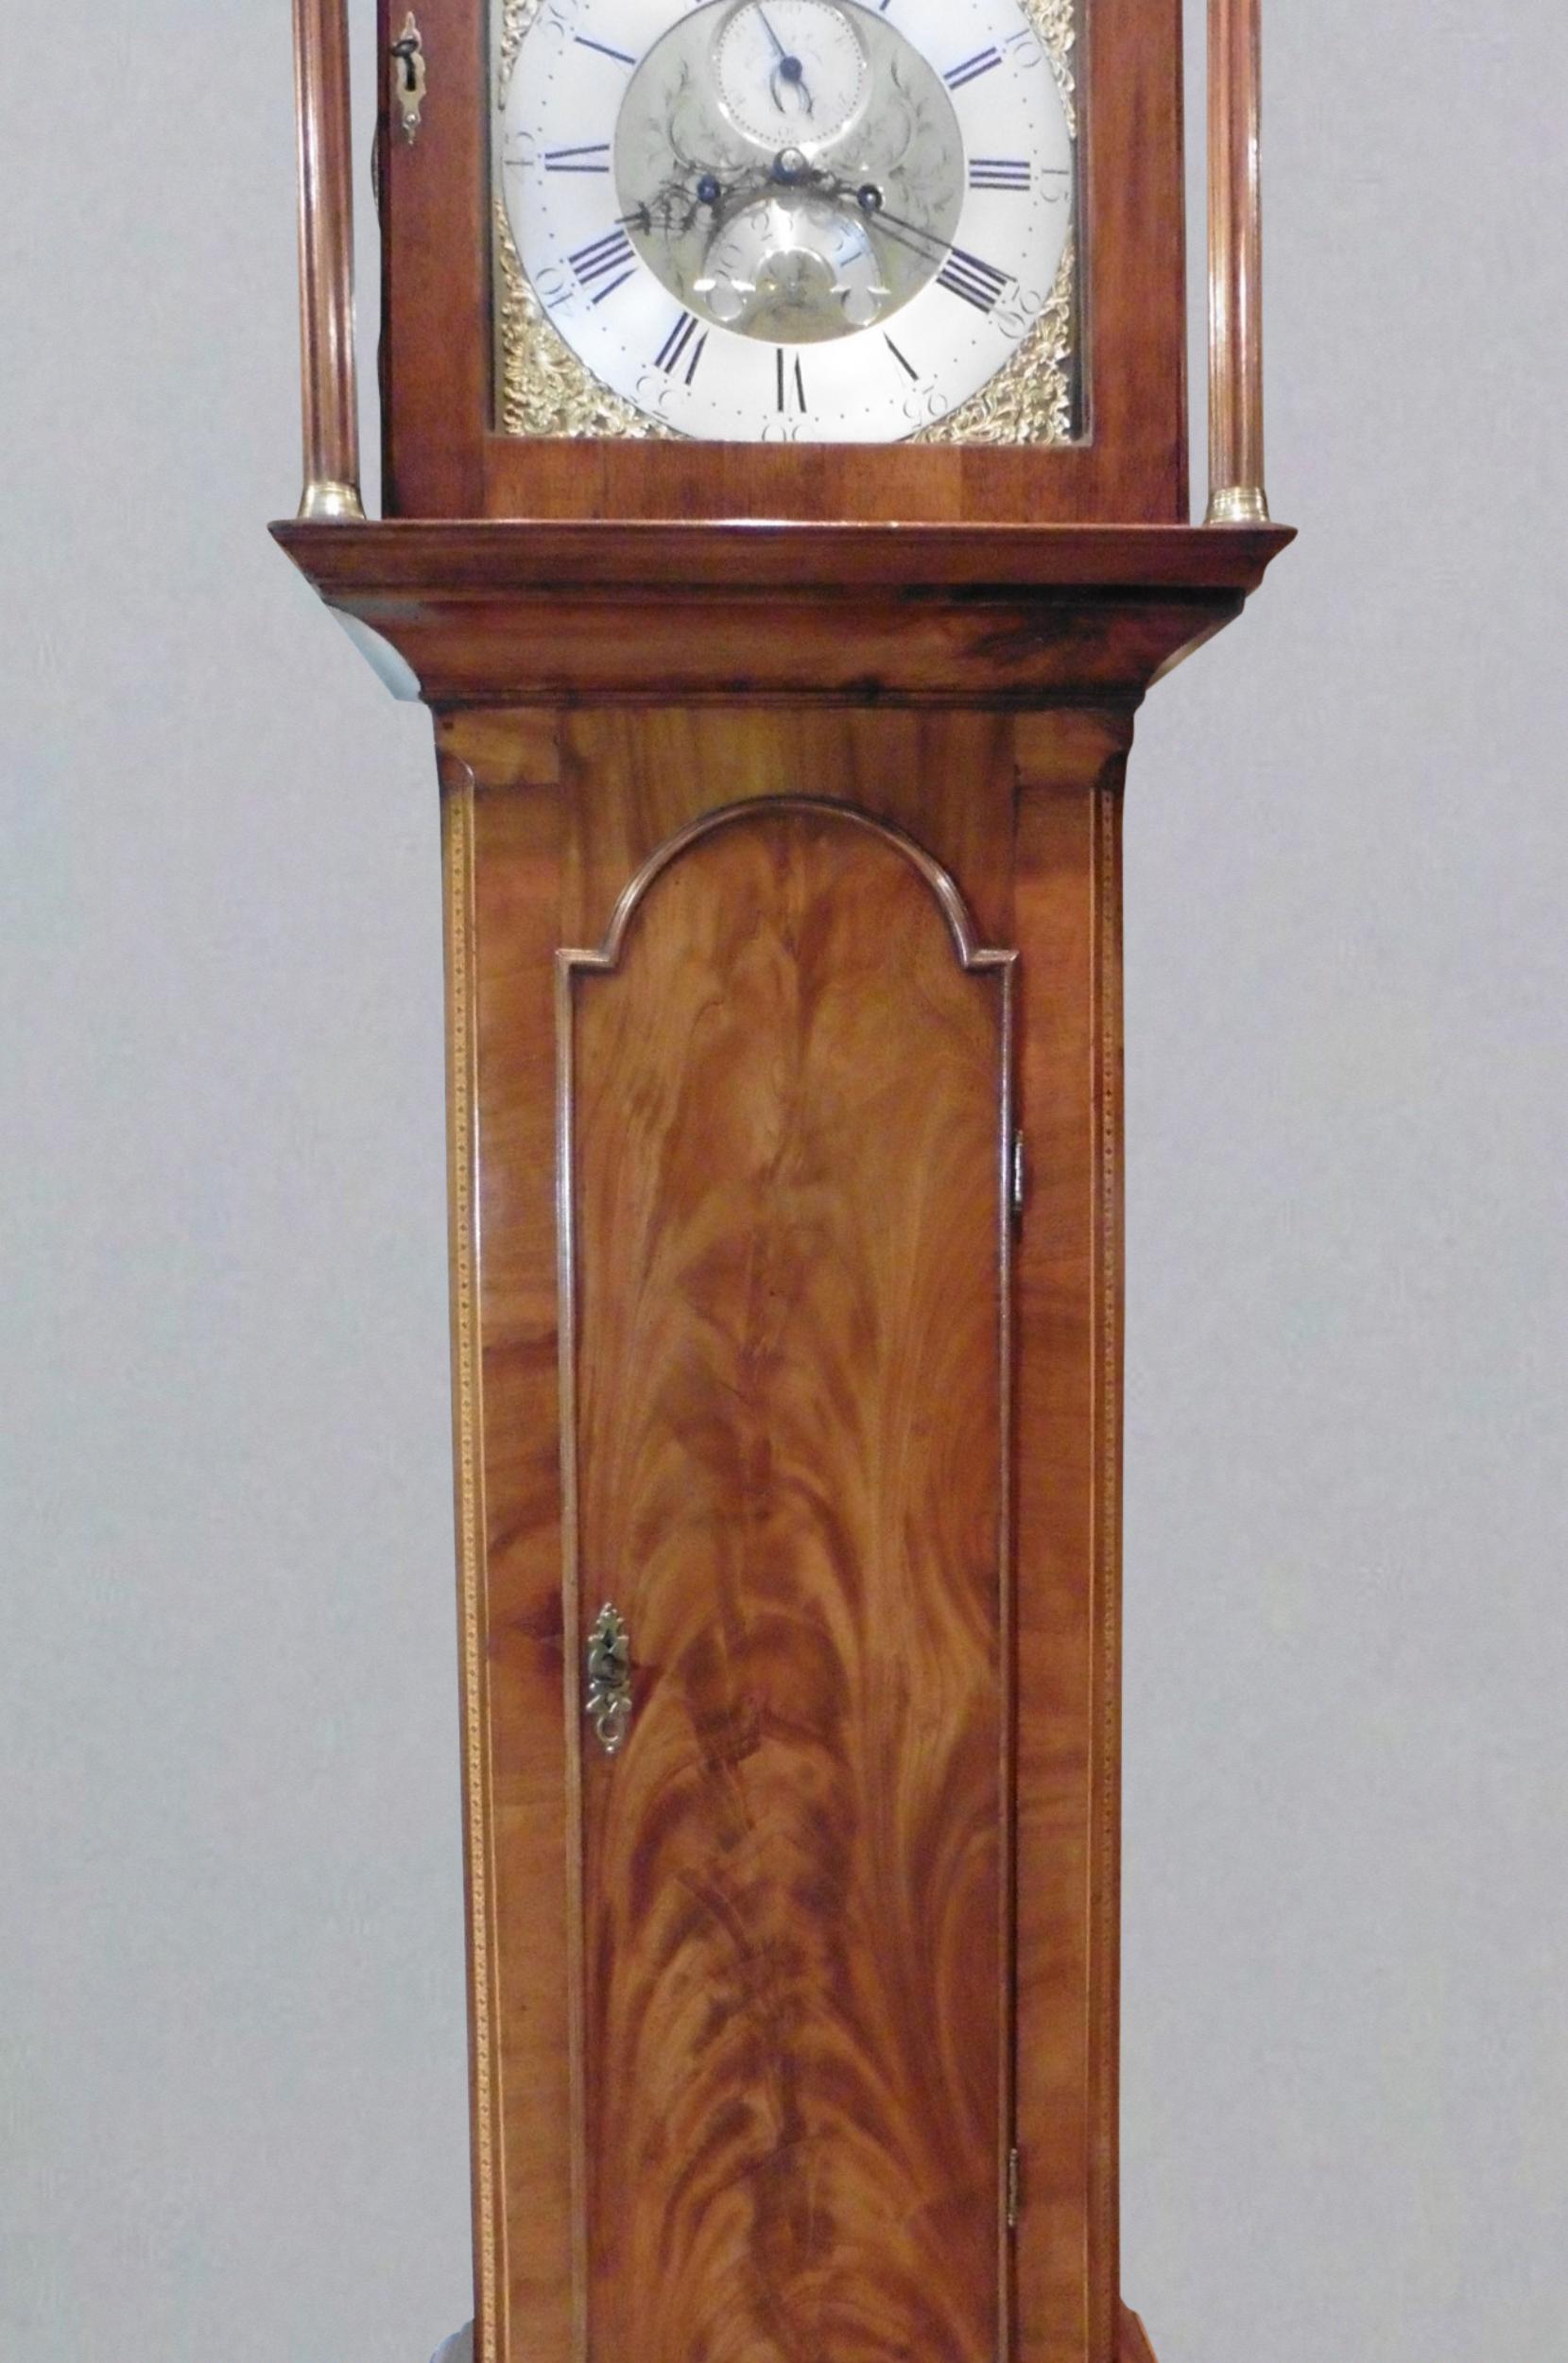 Georgian mahogany longcase clock by Stephen Mears, Hempnall




Finely figured mahogany case with long break arch trunk door with canted corners inlaid with boxwood and satinwood. Break arch hood with typical East Anglian ‘Wales Tails’ pediment